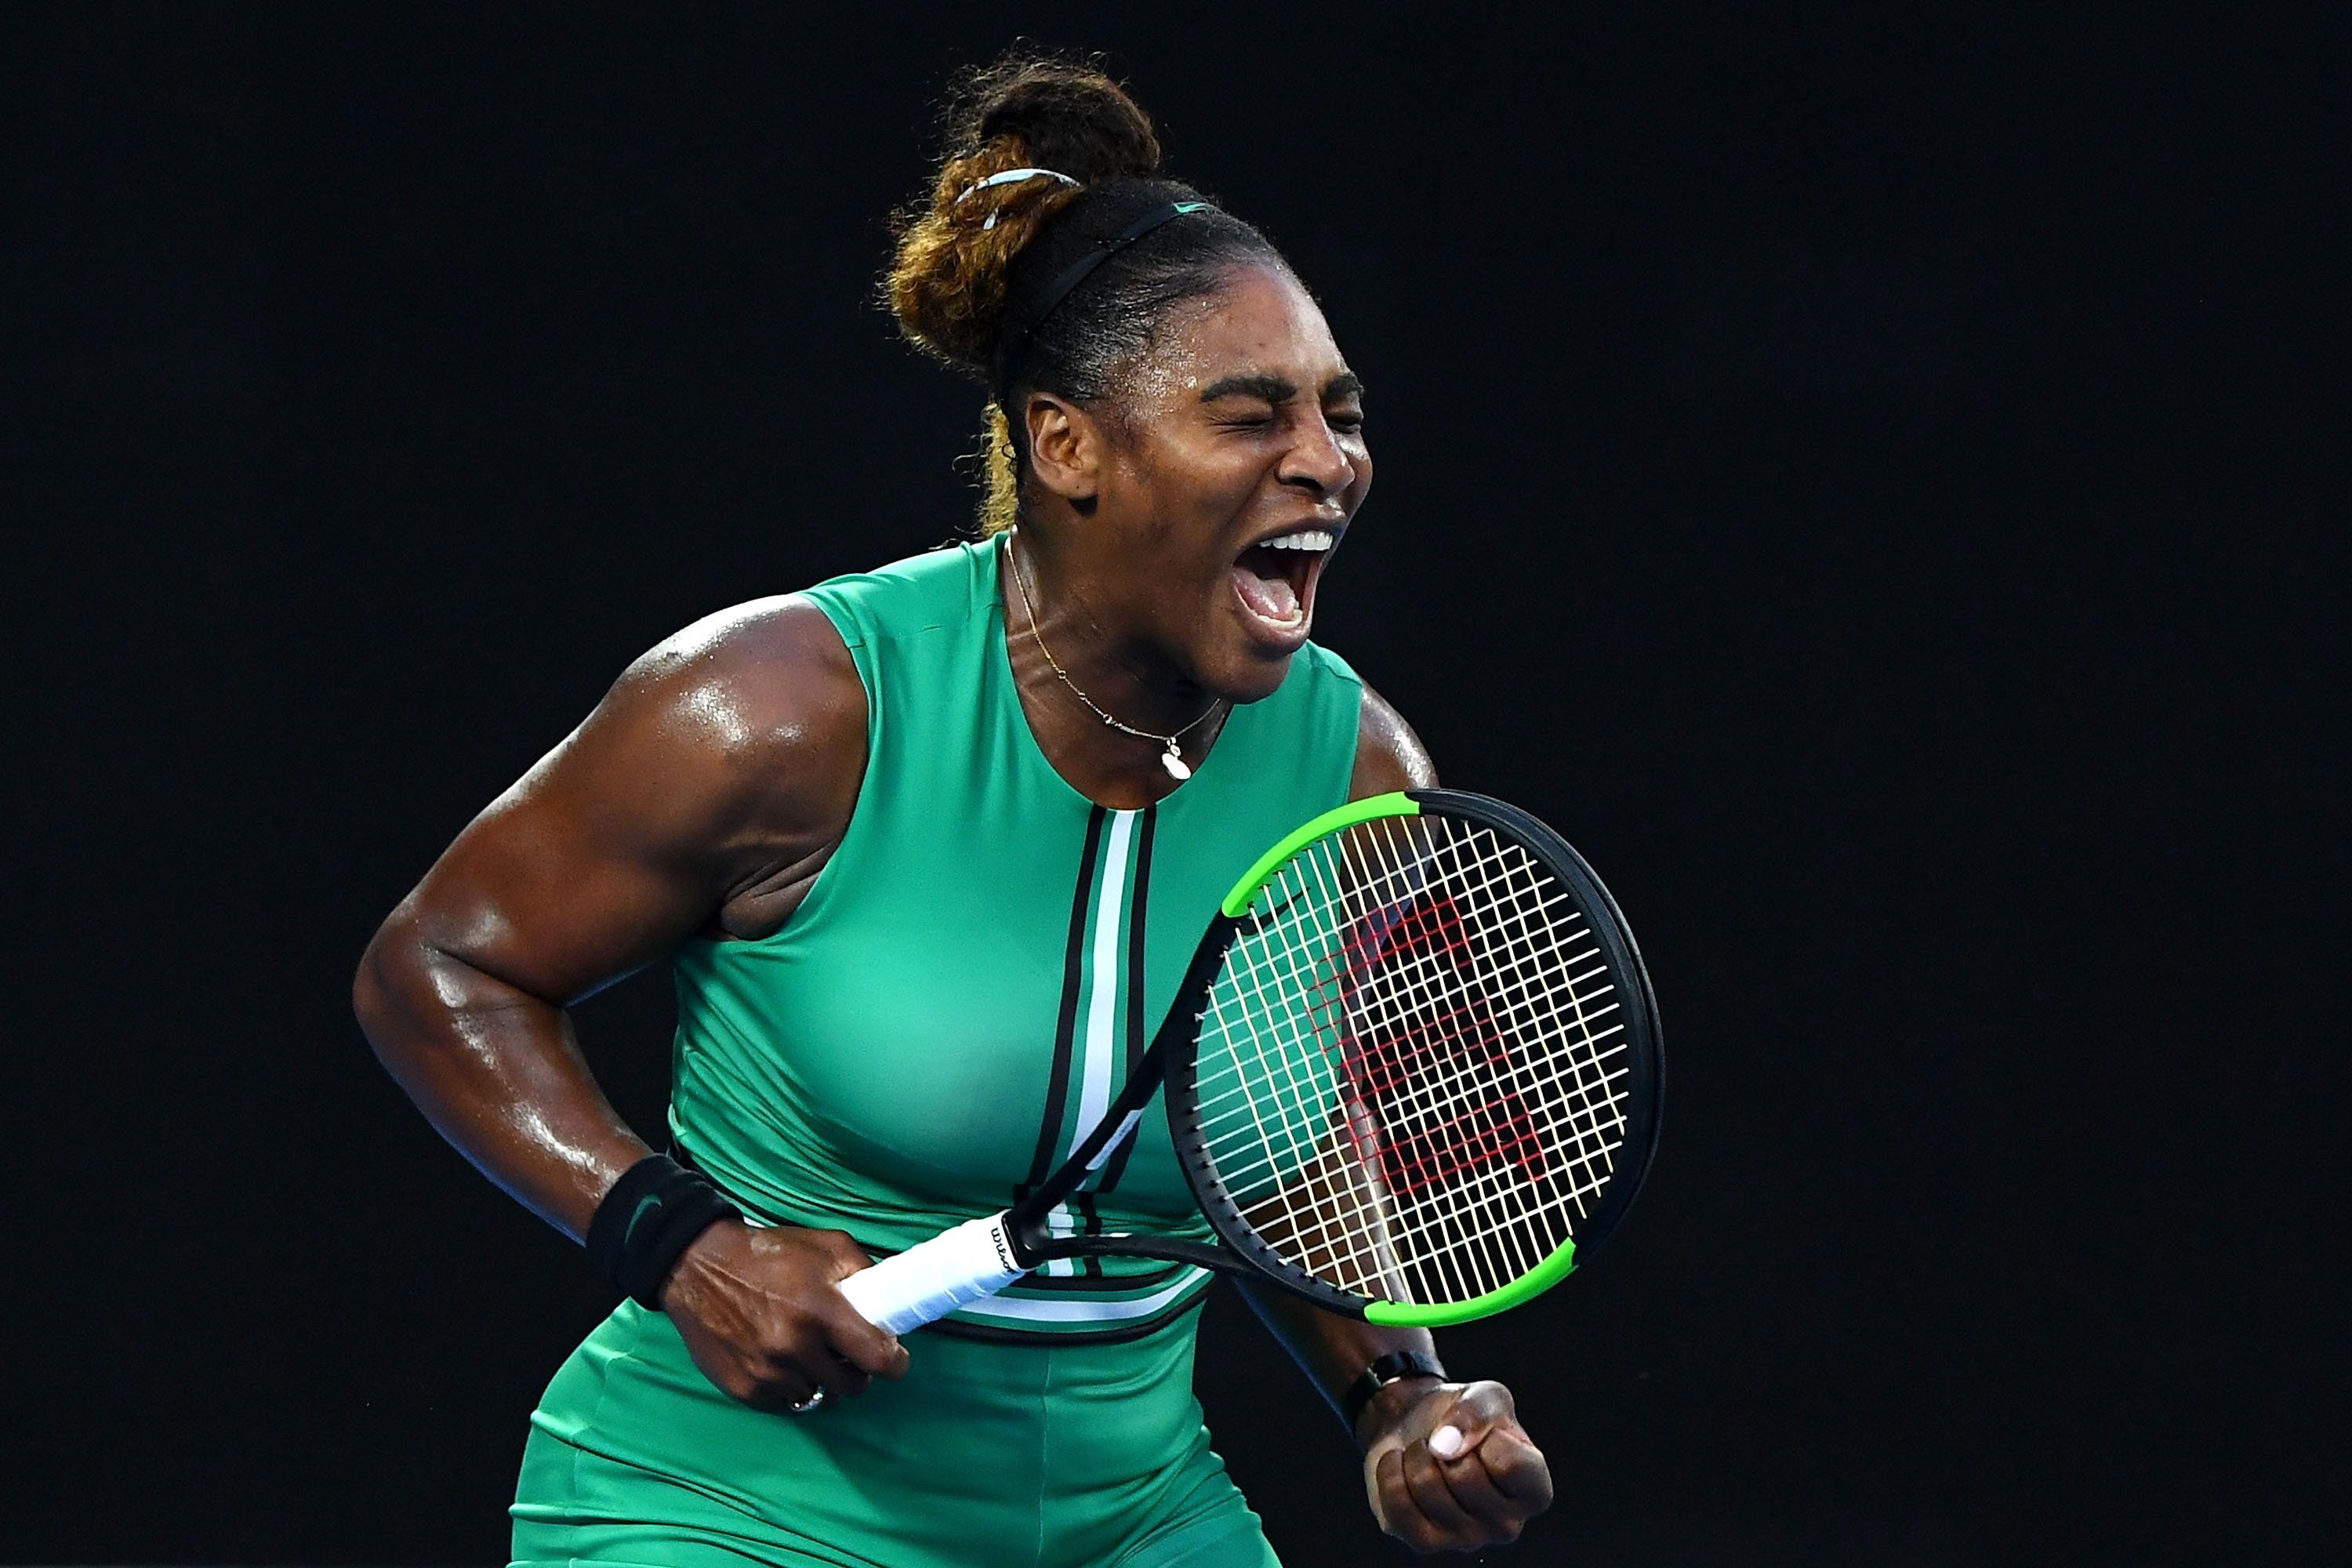 Serena Williams showing her emotions during her game at the 2017 Australian Open in Melbourne, Australia. | Photo: Getty Images